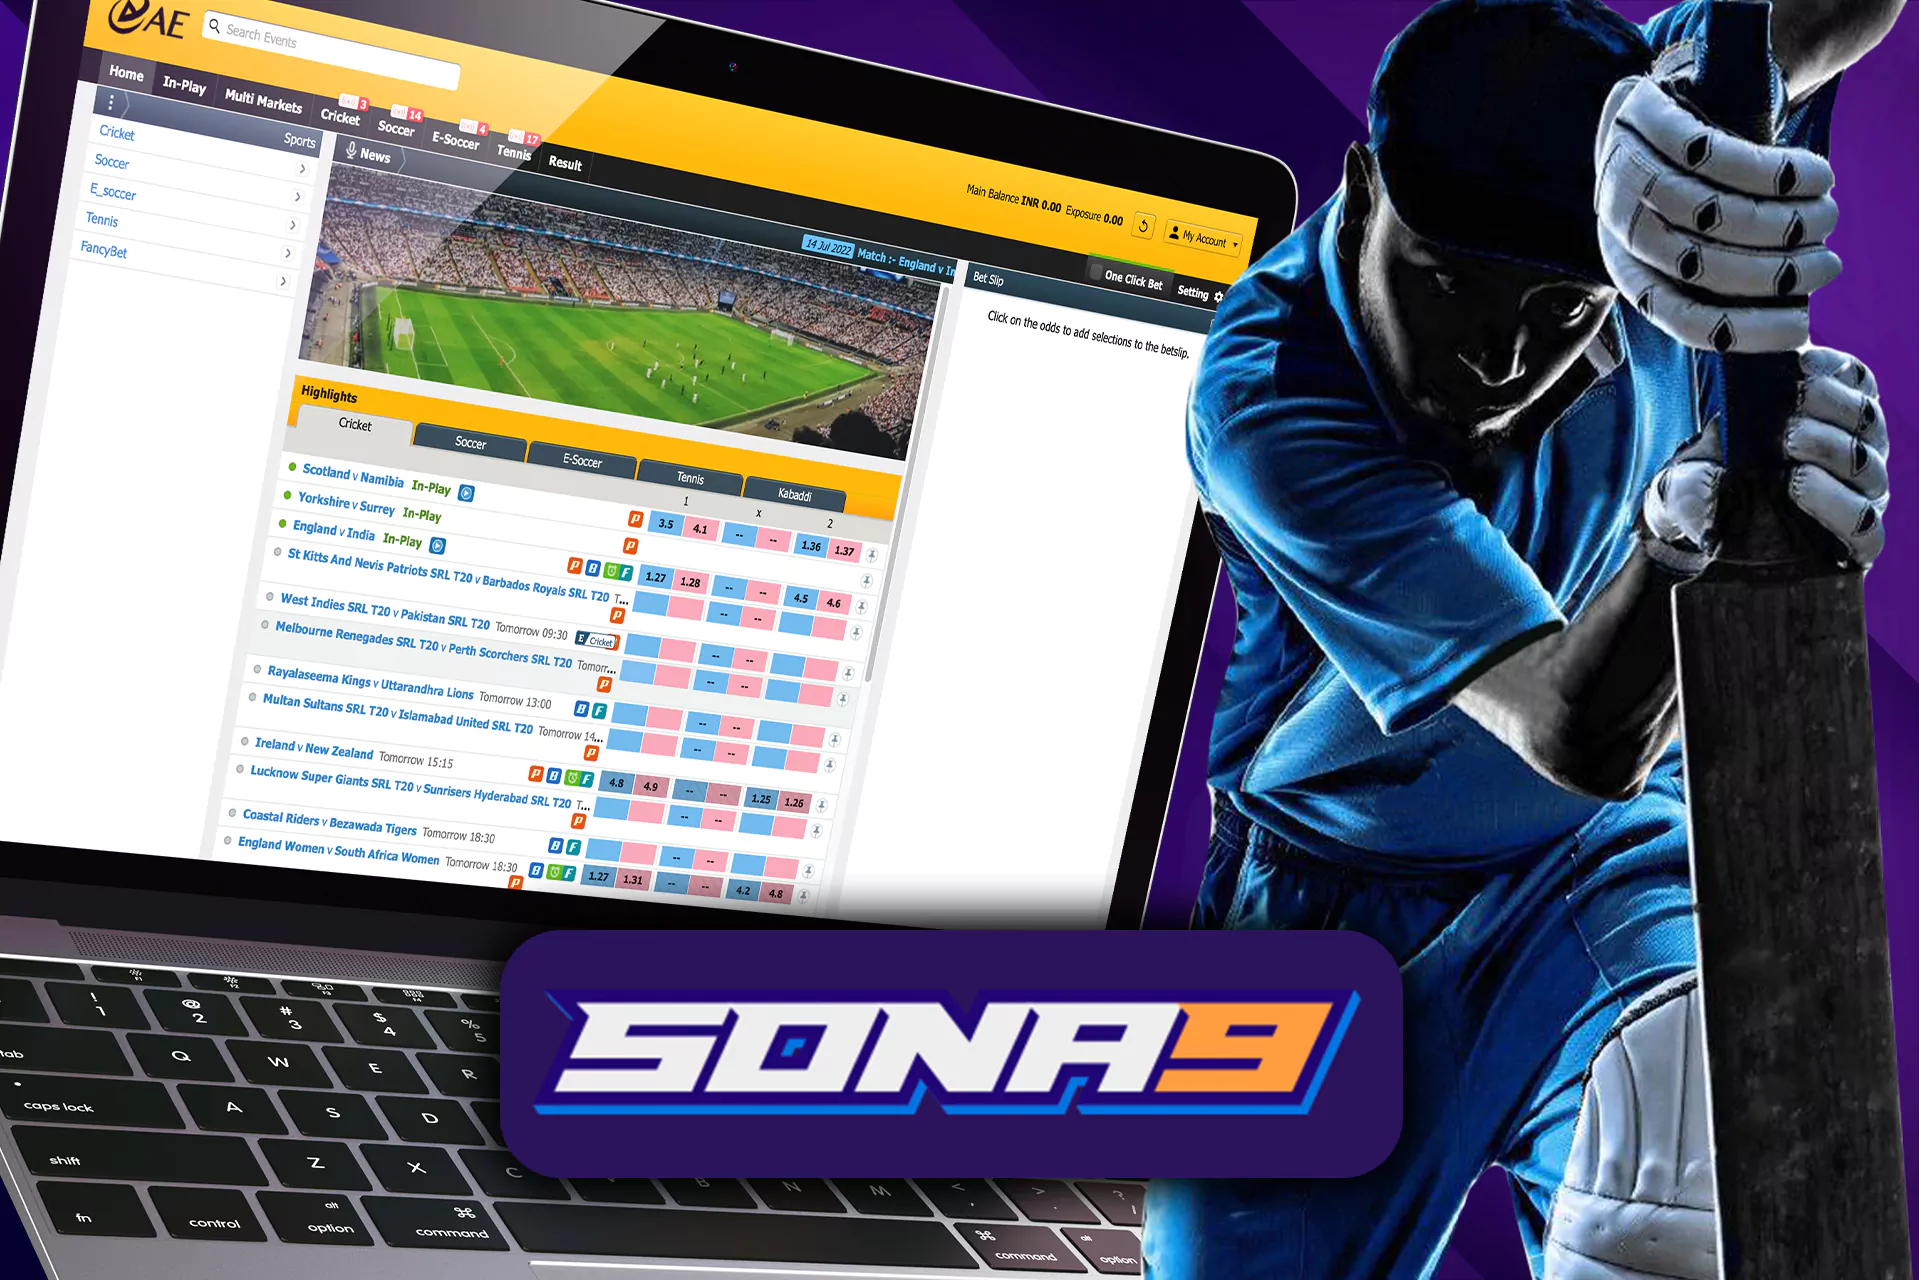 You can bet on Sona9 at different cricket leagues and teams.